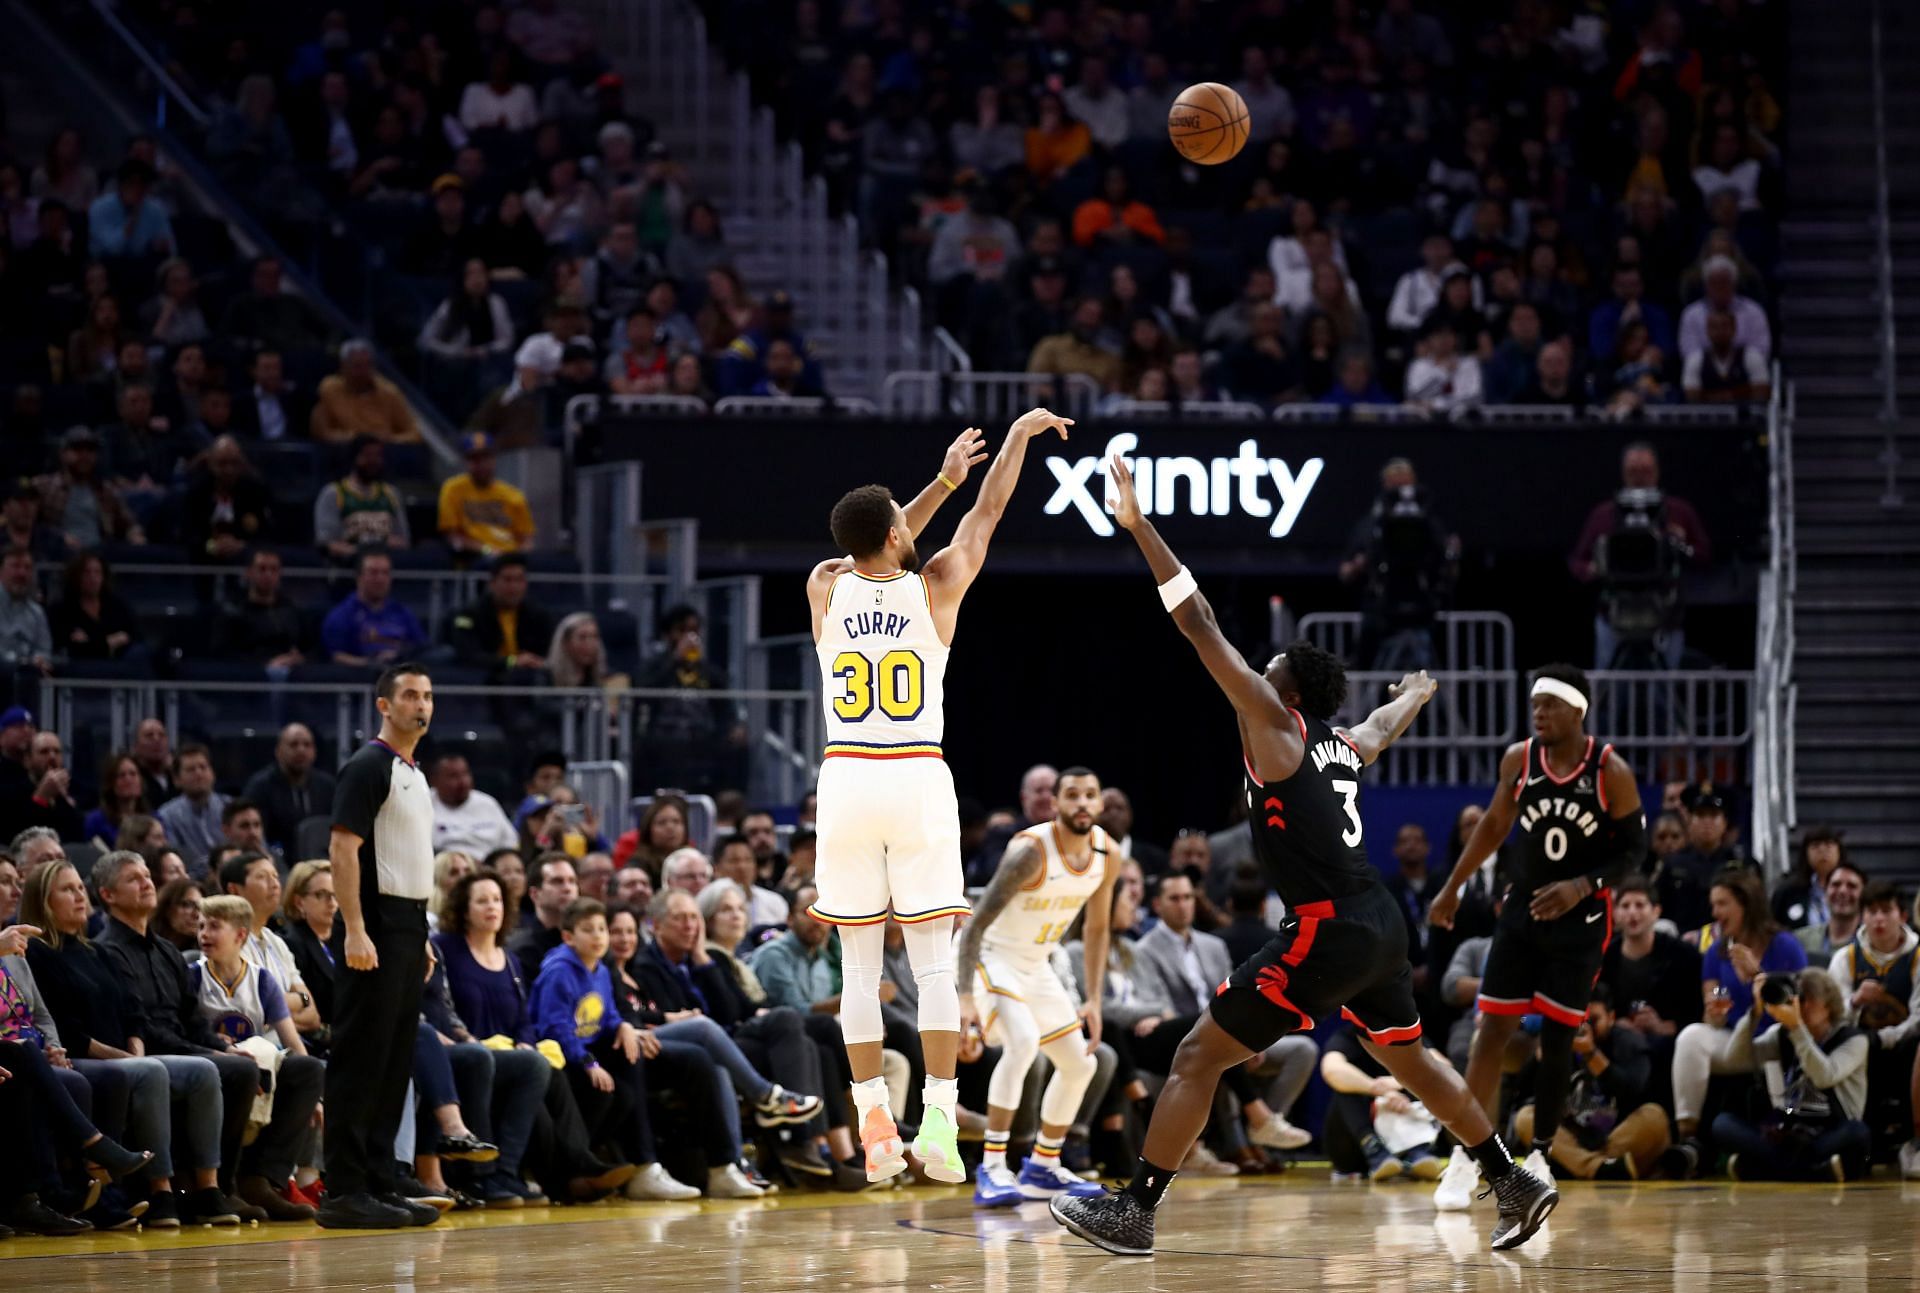 Steph Curry of the Golden State Warriors takes a three-point shot against the Toronto Raptors.